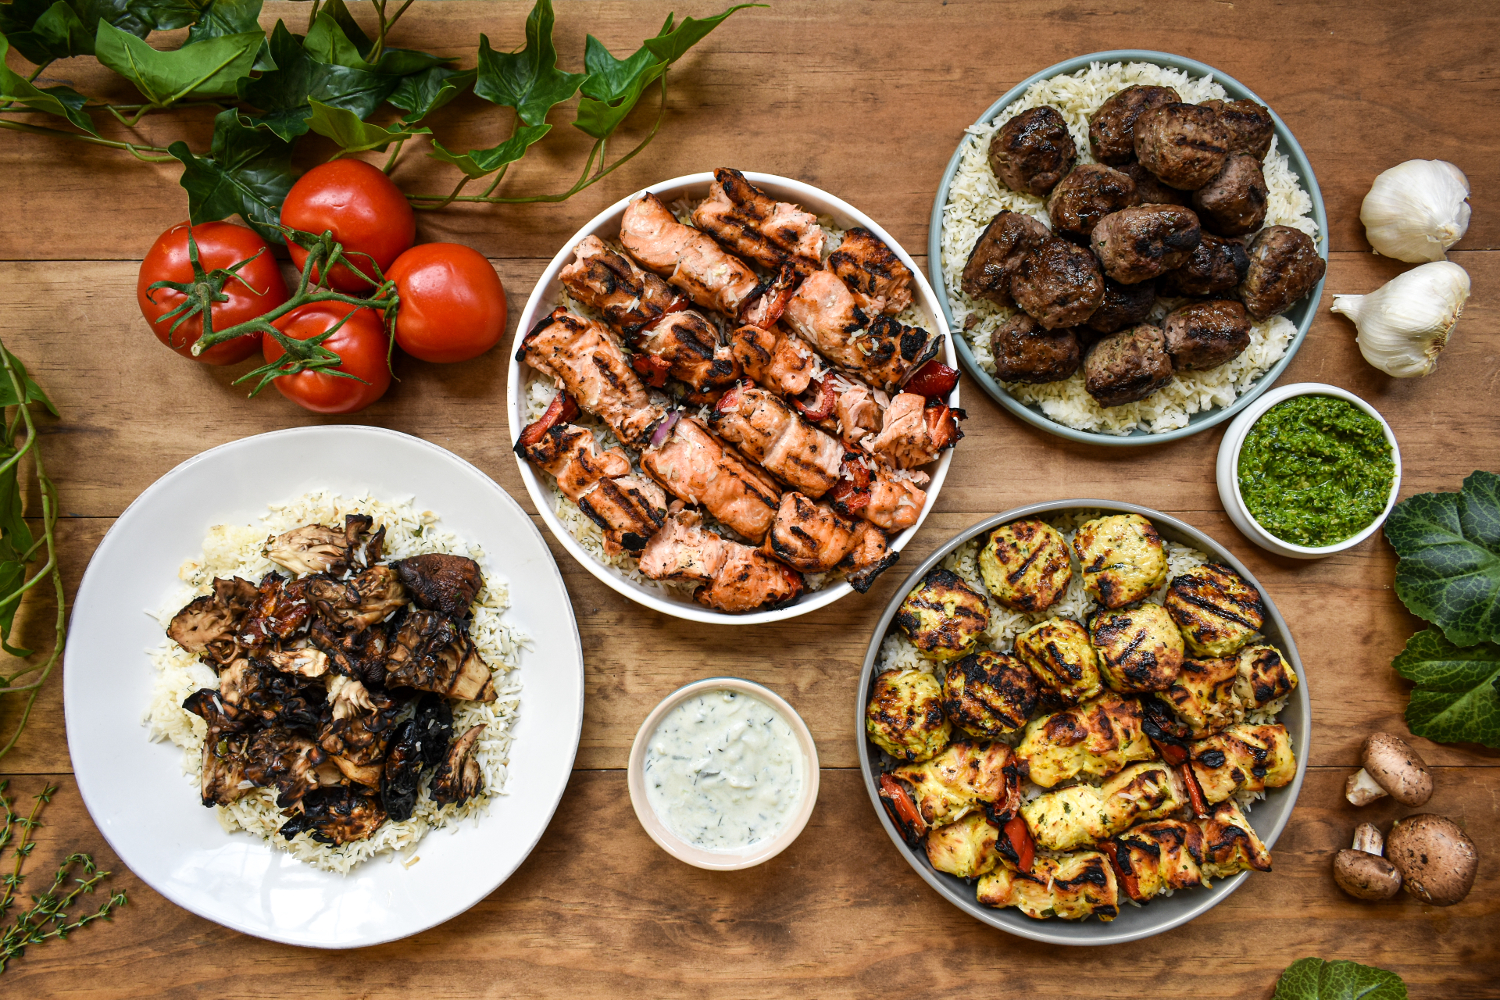 A spread from Aba Kebab.